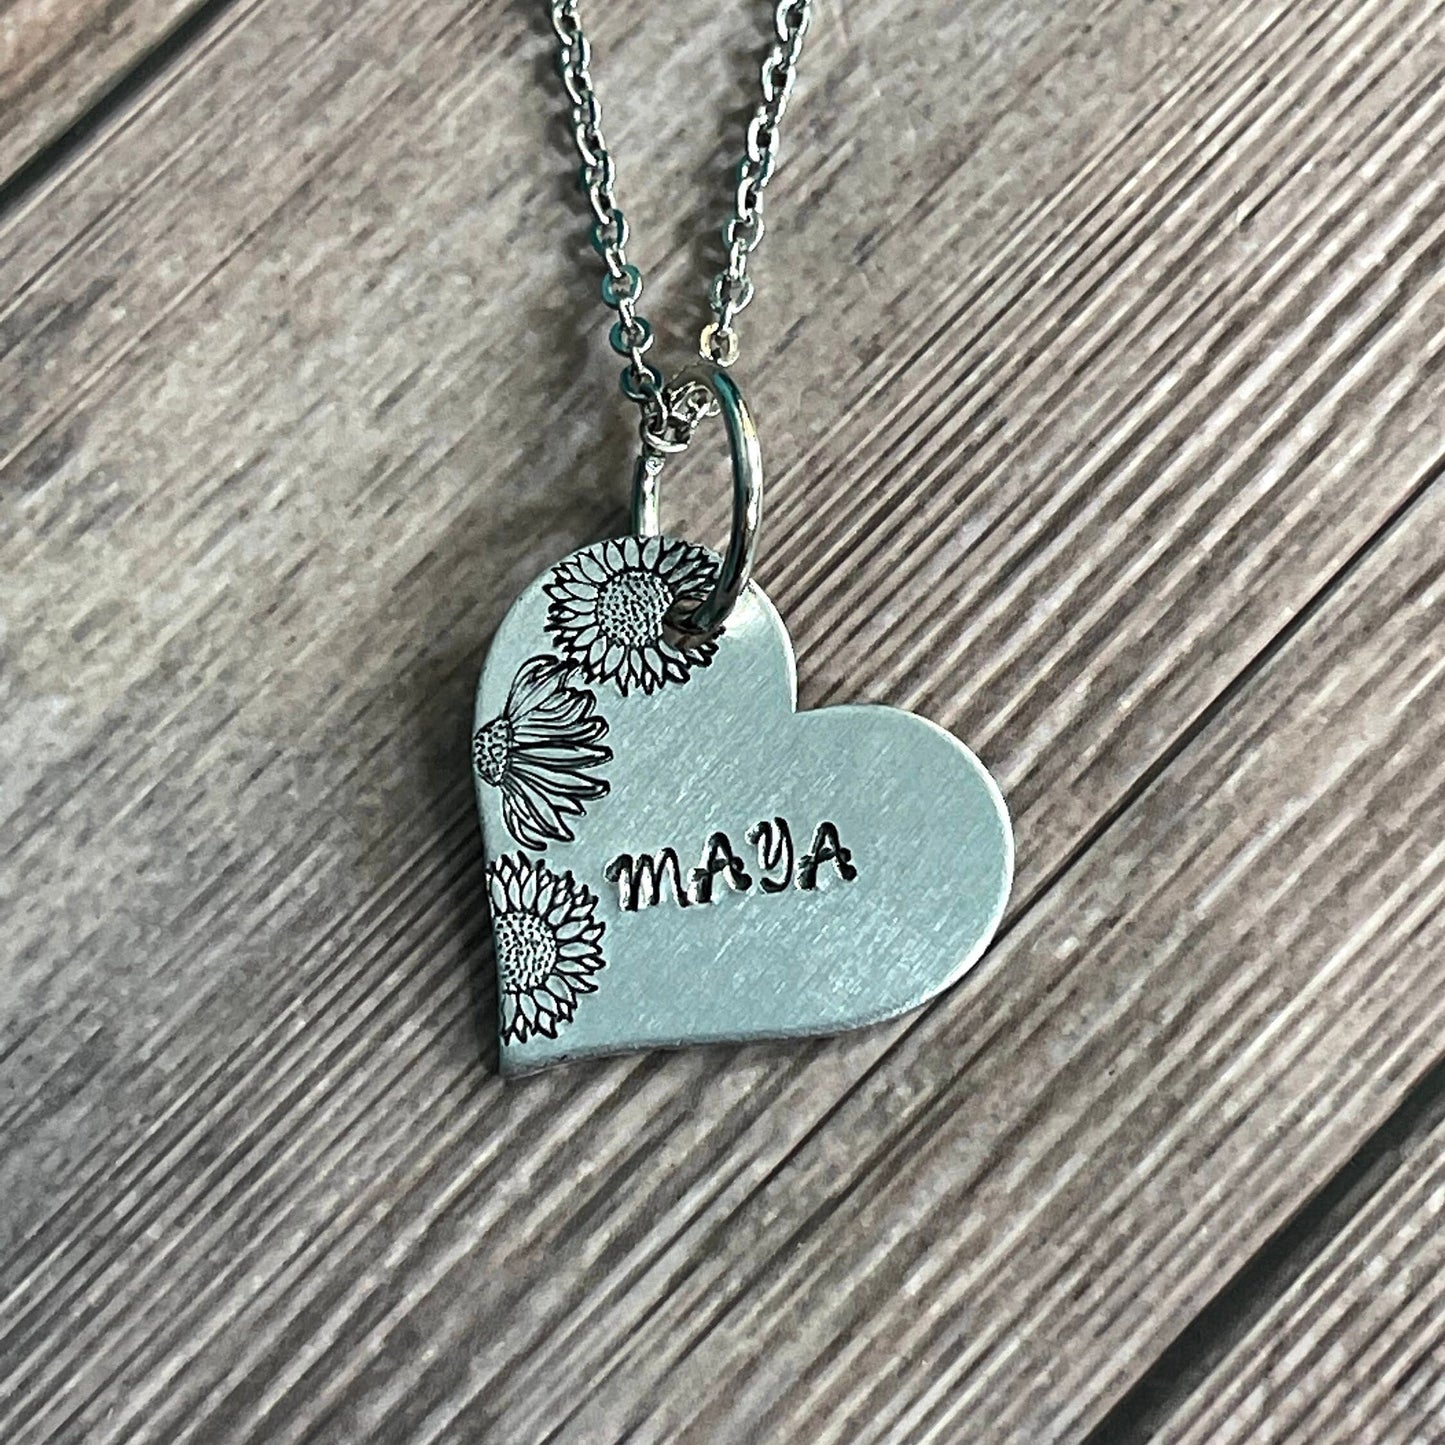 PERSONALIZED HEART NECKLACE